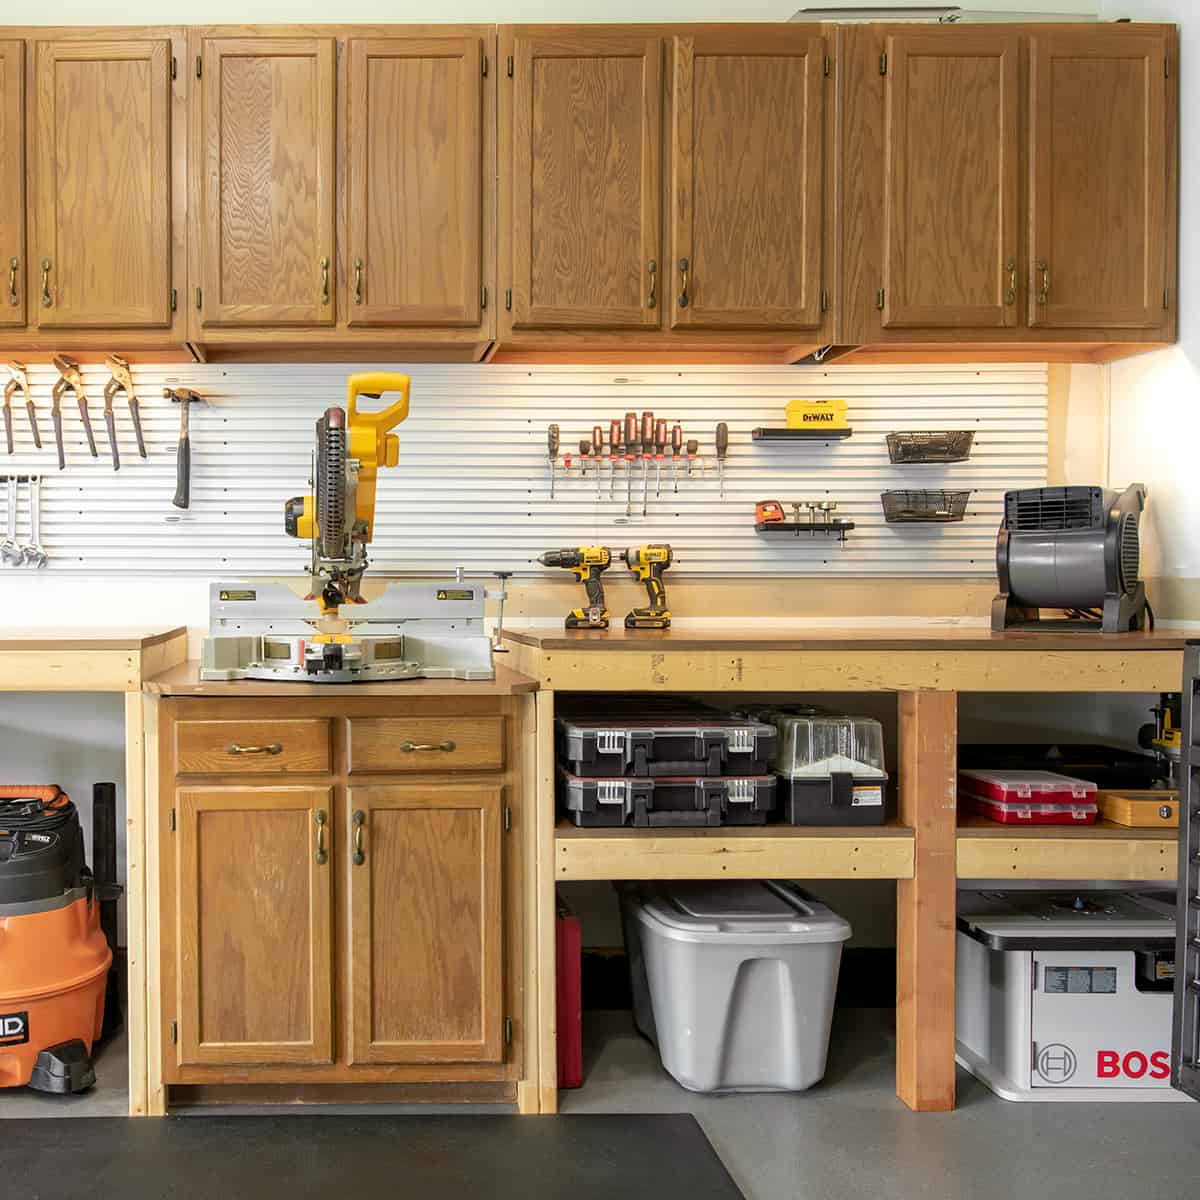 Garage woodworking miter saw station with cabinets and tool storage.